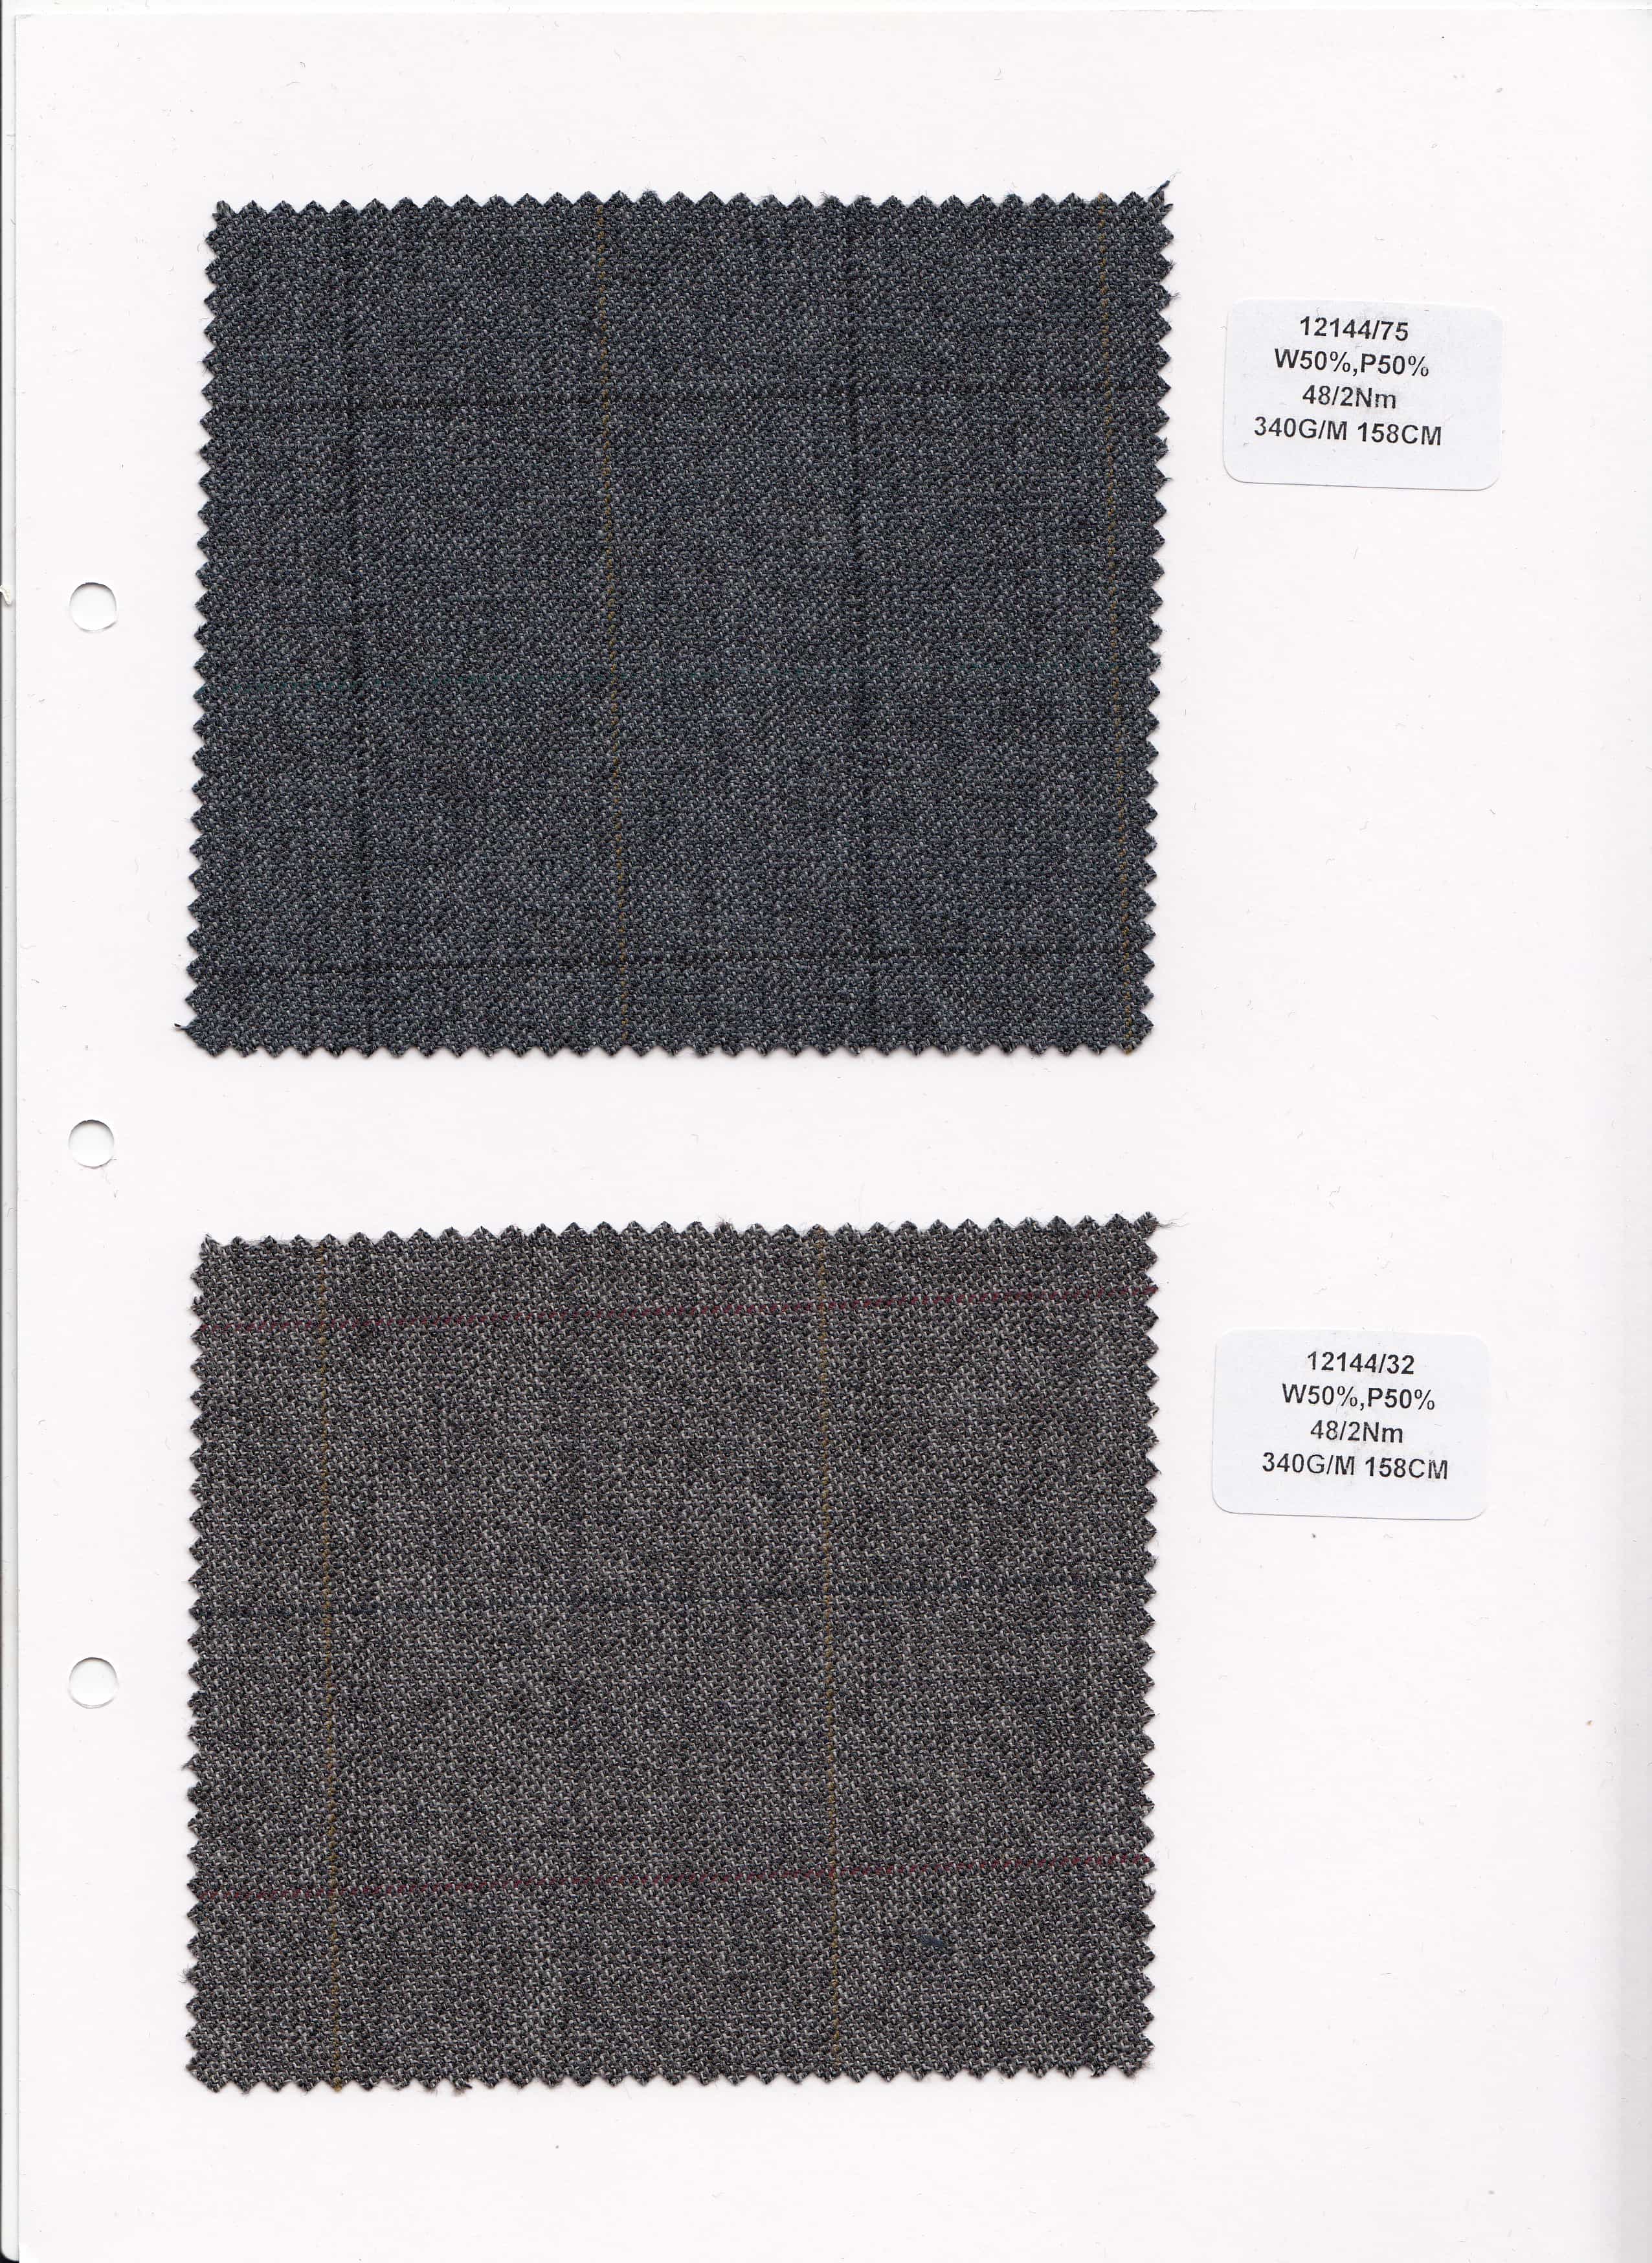 Japan worsted wool fabric